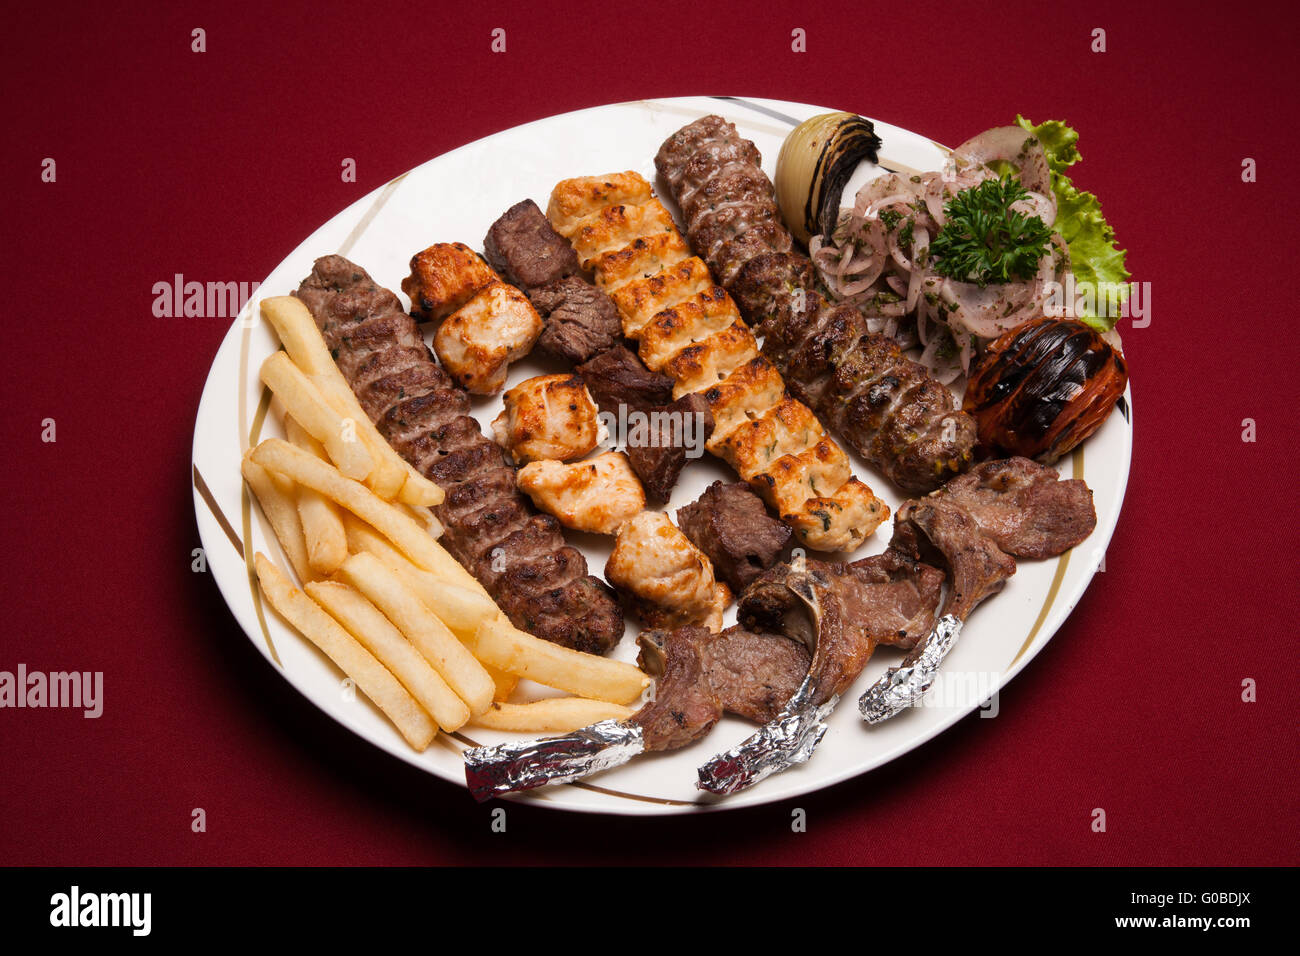 Mixed grills. Lebanese and Middle Eastern food. Stock Photo